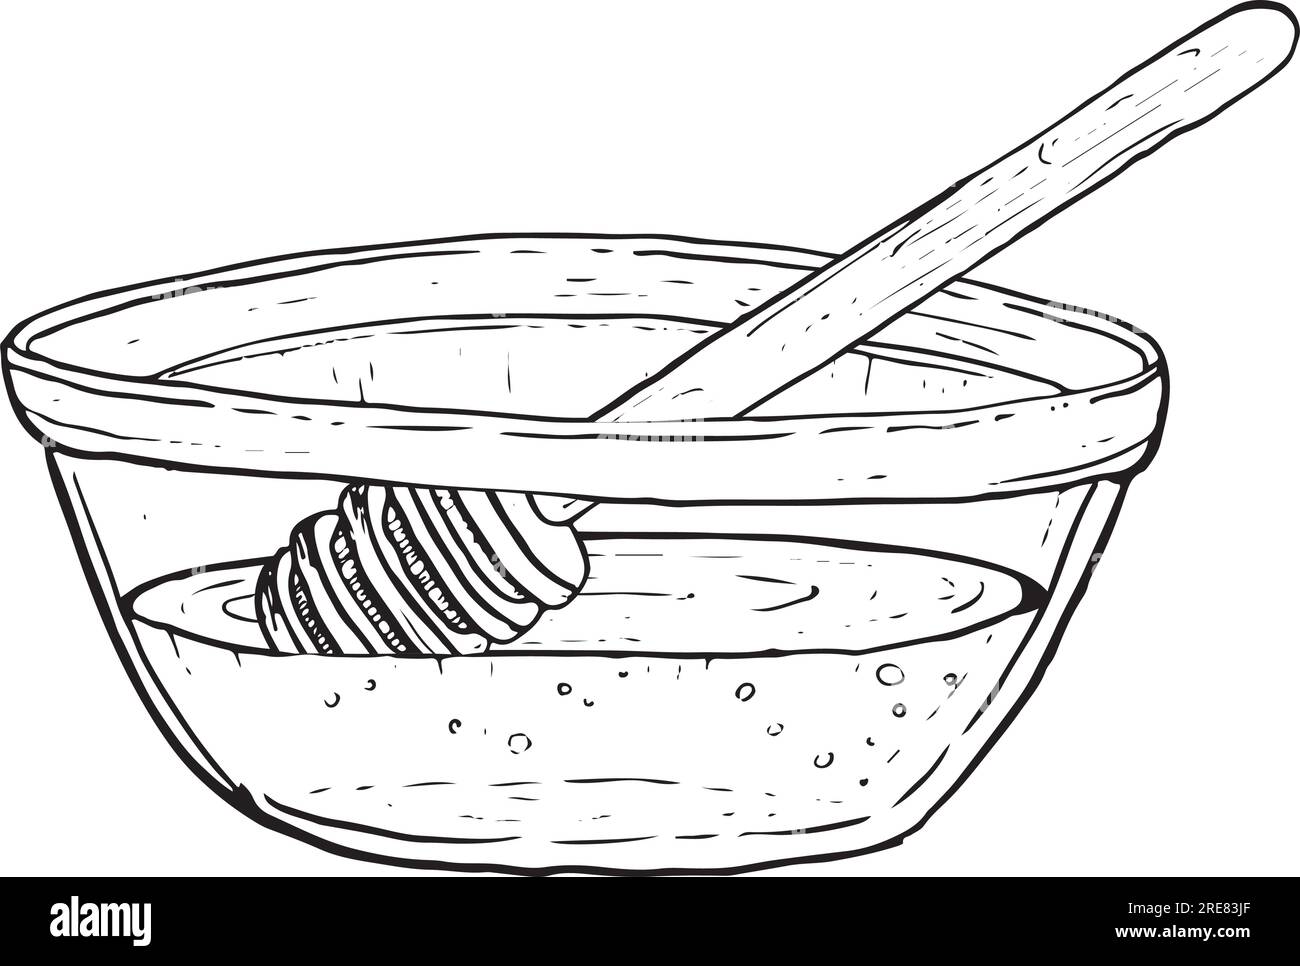 Honey in glass bowl with wooden dipper spoon vector. Hand drawn line sketch for cookbooks, recipes and kitchen designs Stock Vector